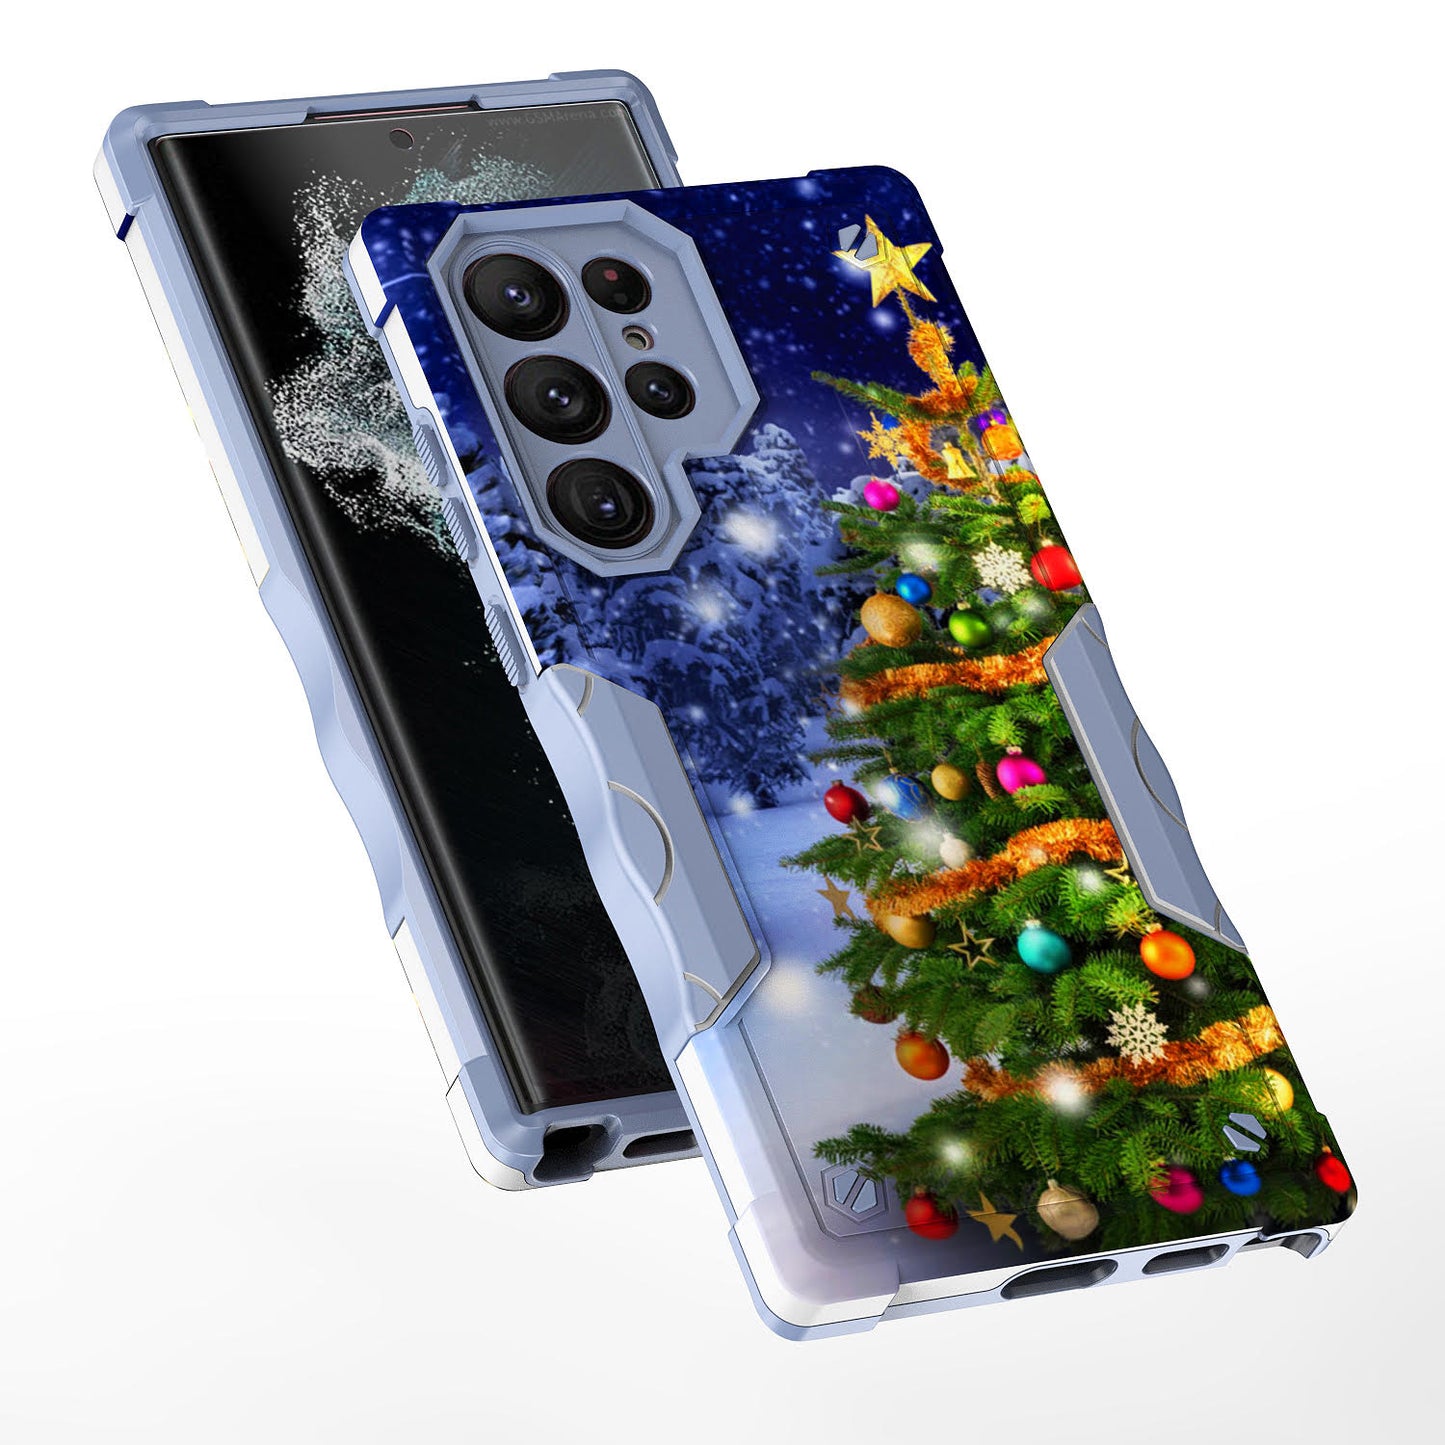 Case For Samsung Galaxy S22 ULTRA - Hybrid Grip Design Shockproof Phone Cover - Christmas Tree